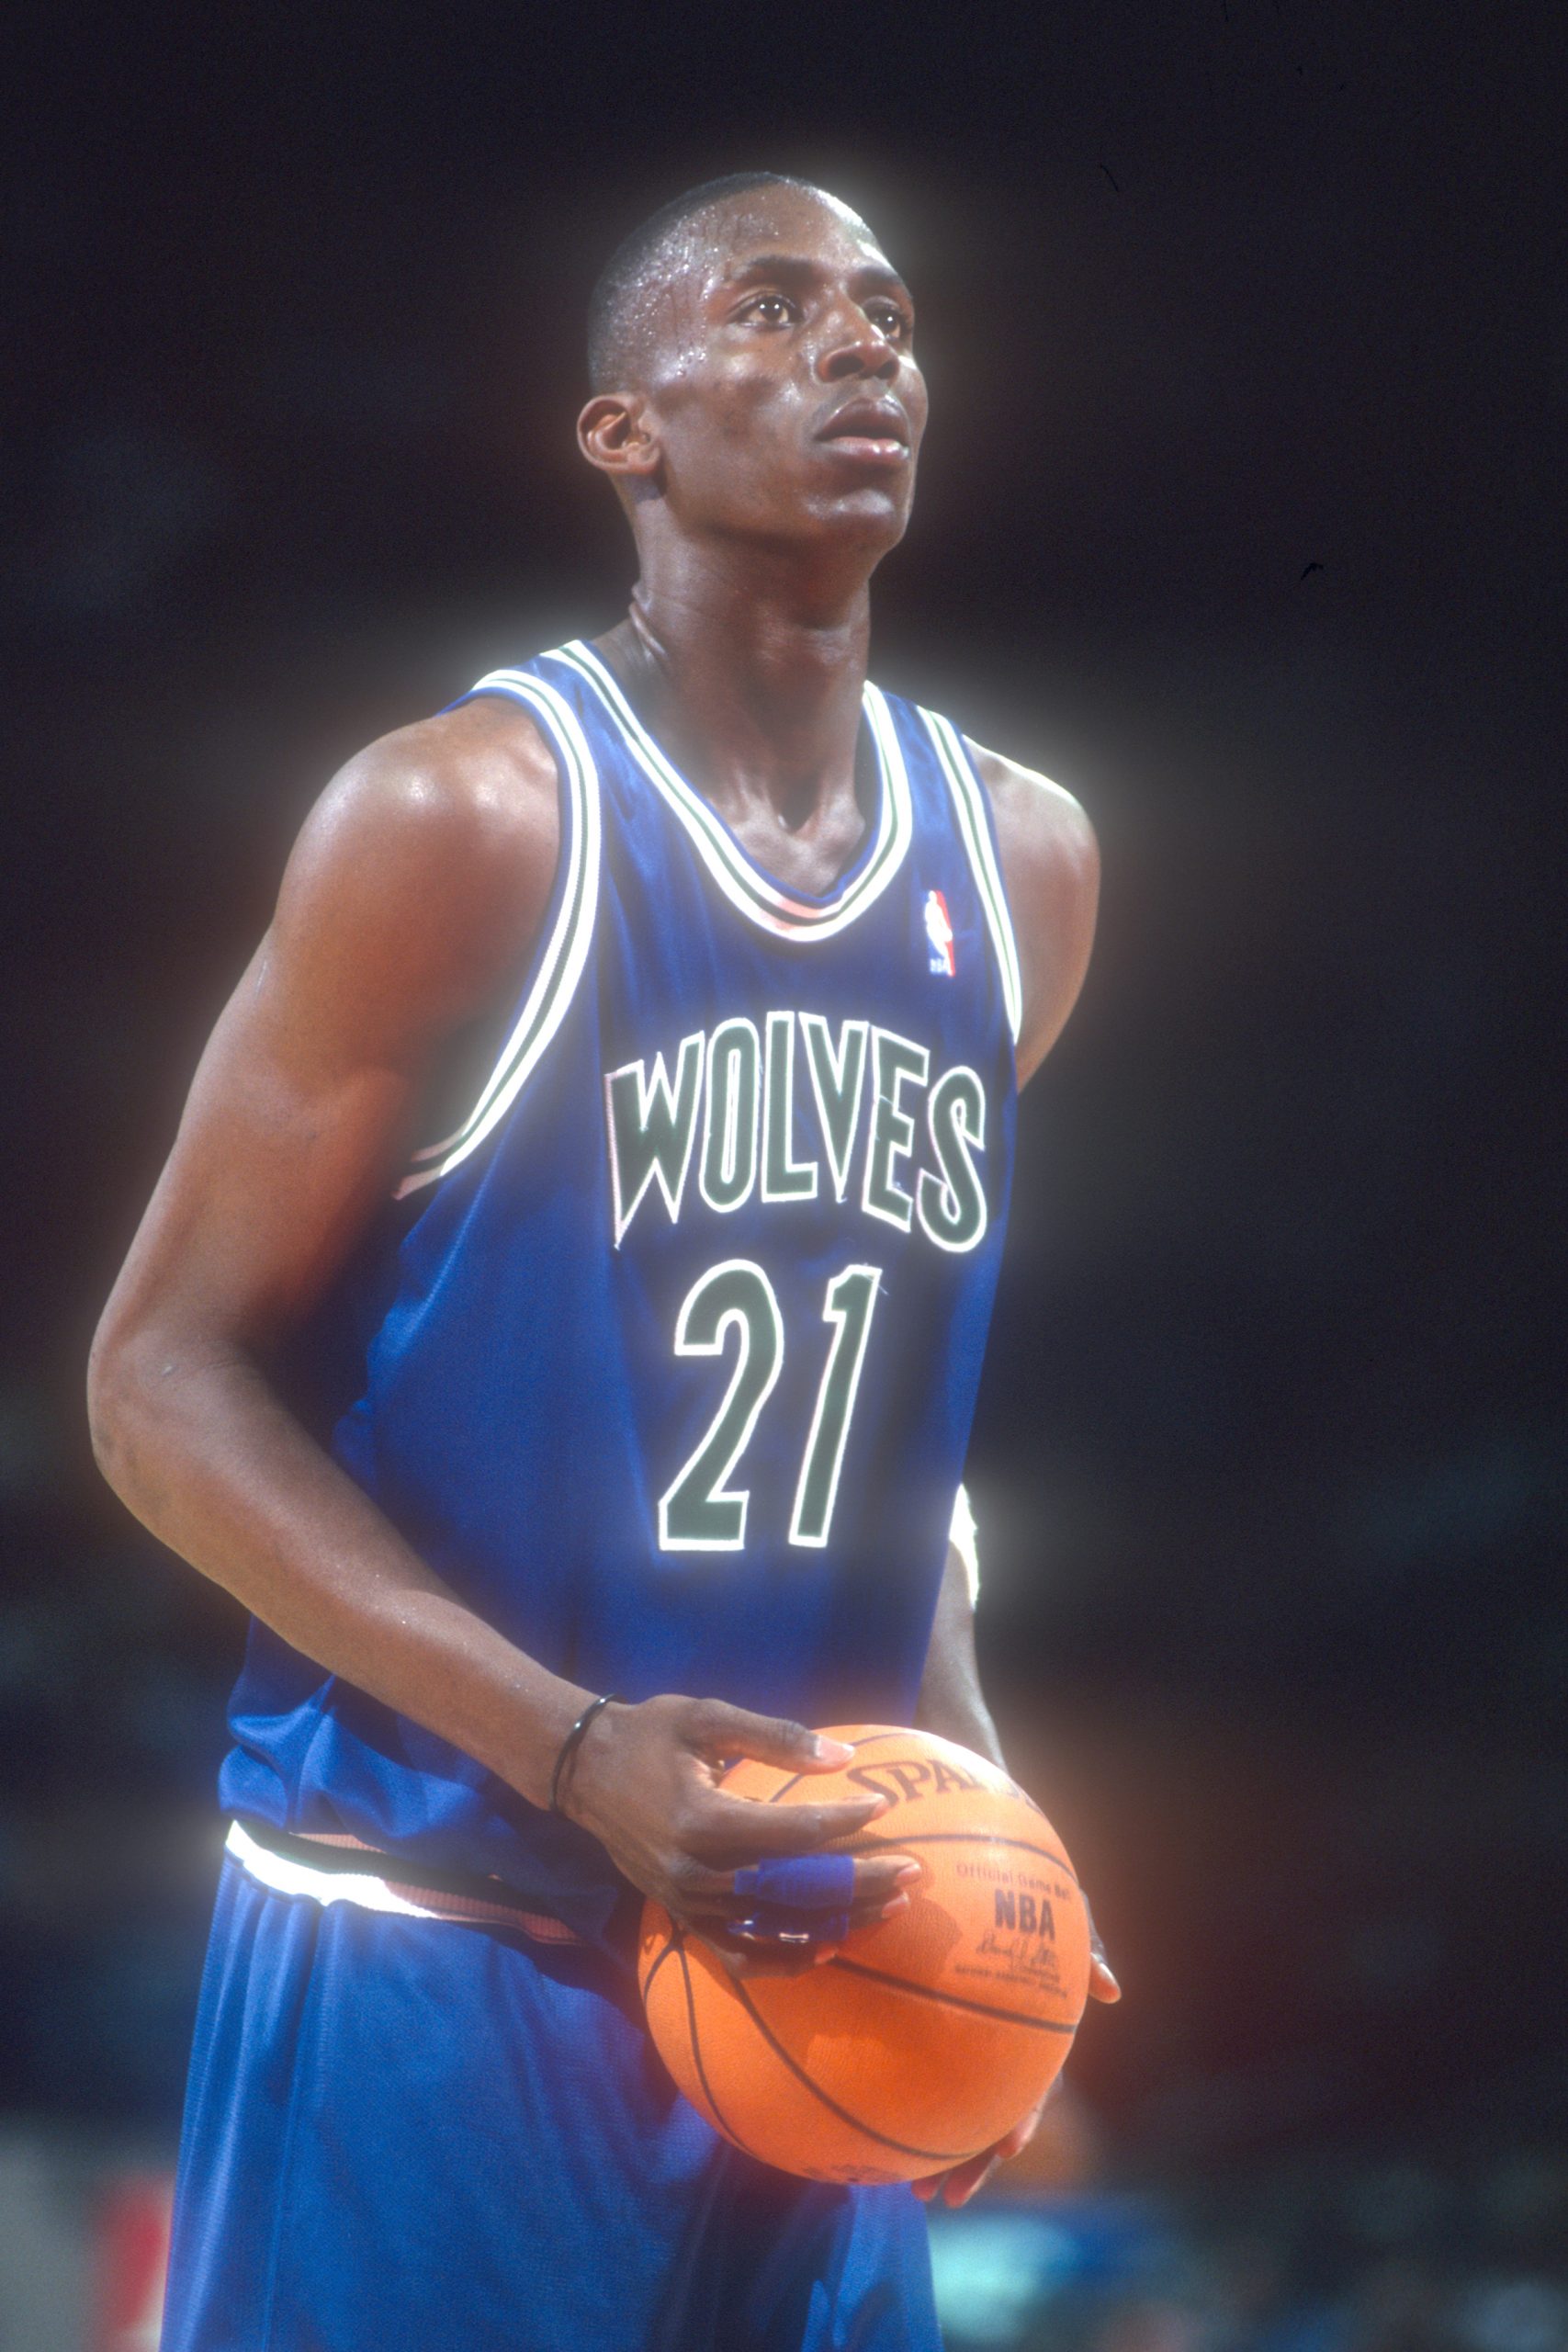 Kevin Garnett details how playing in Chicago prepared him for NBA